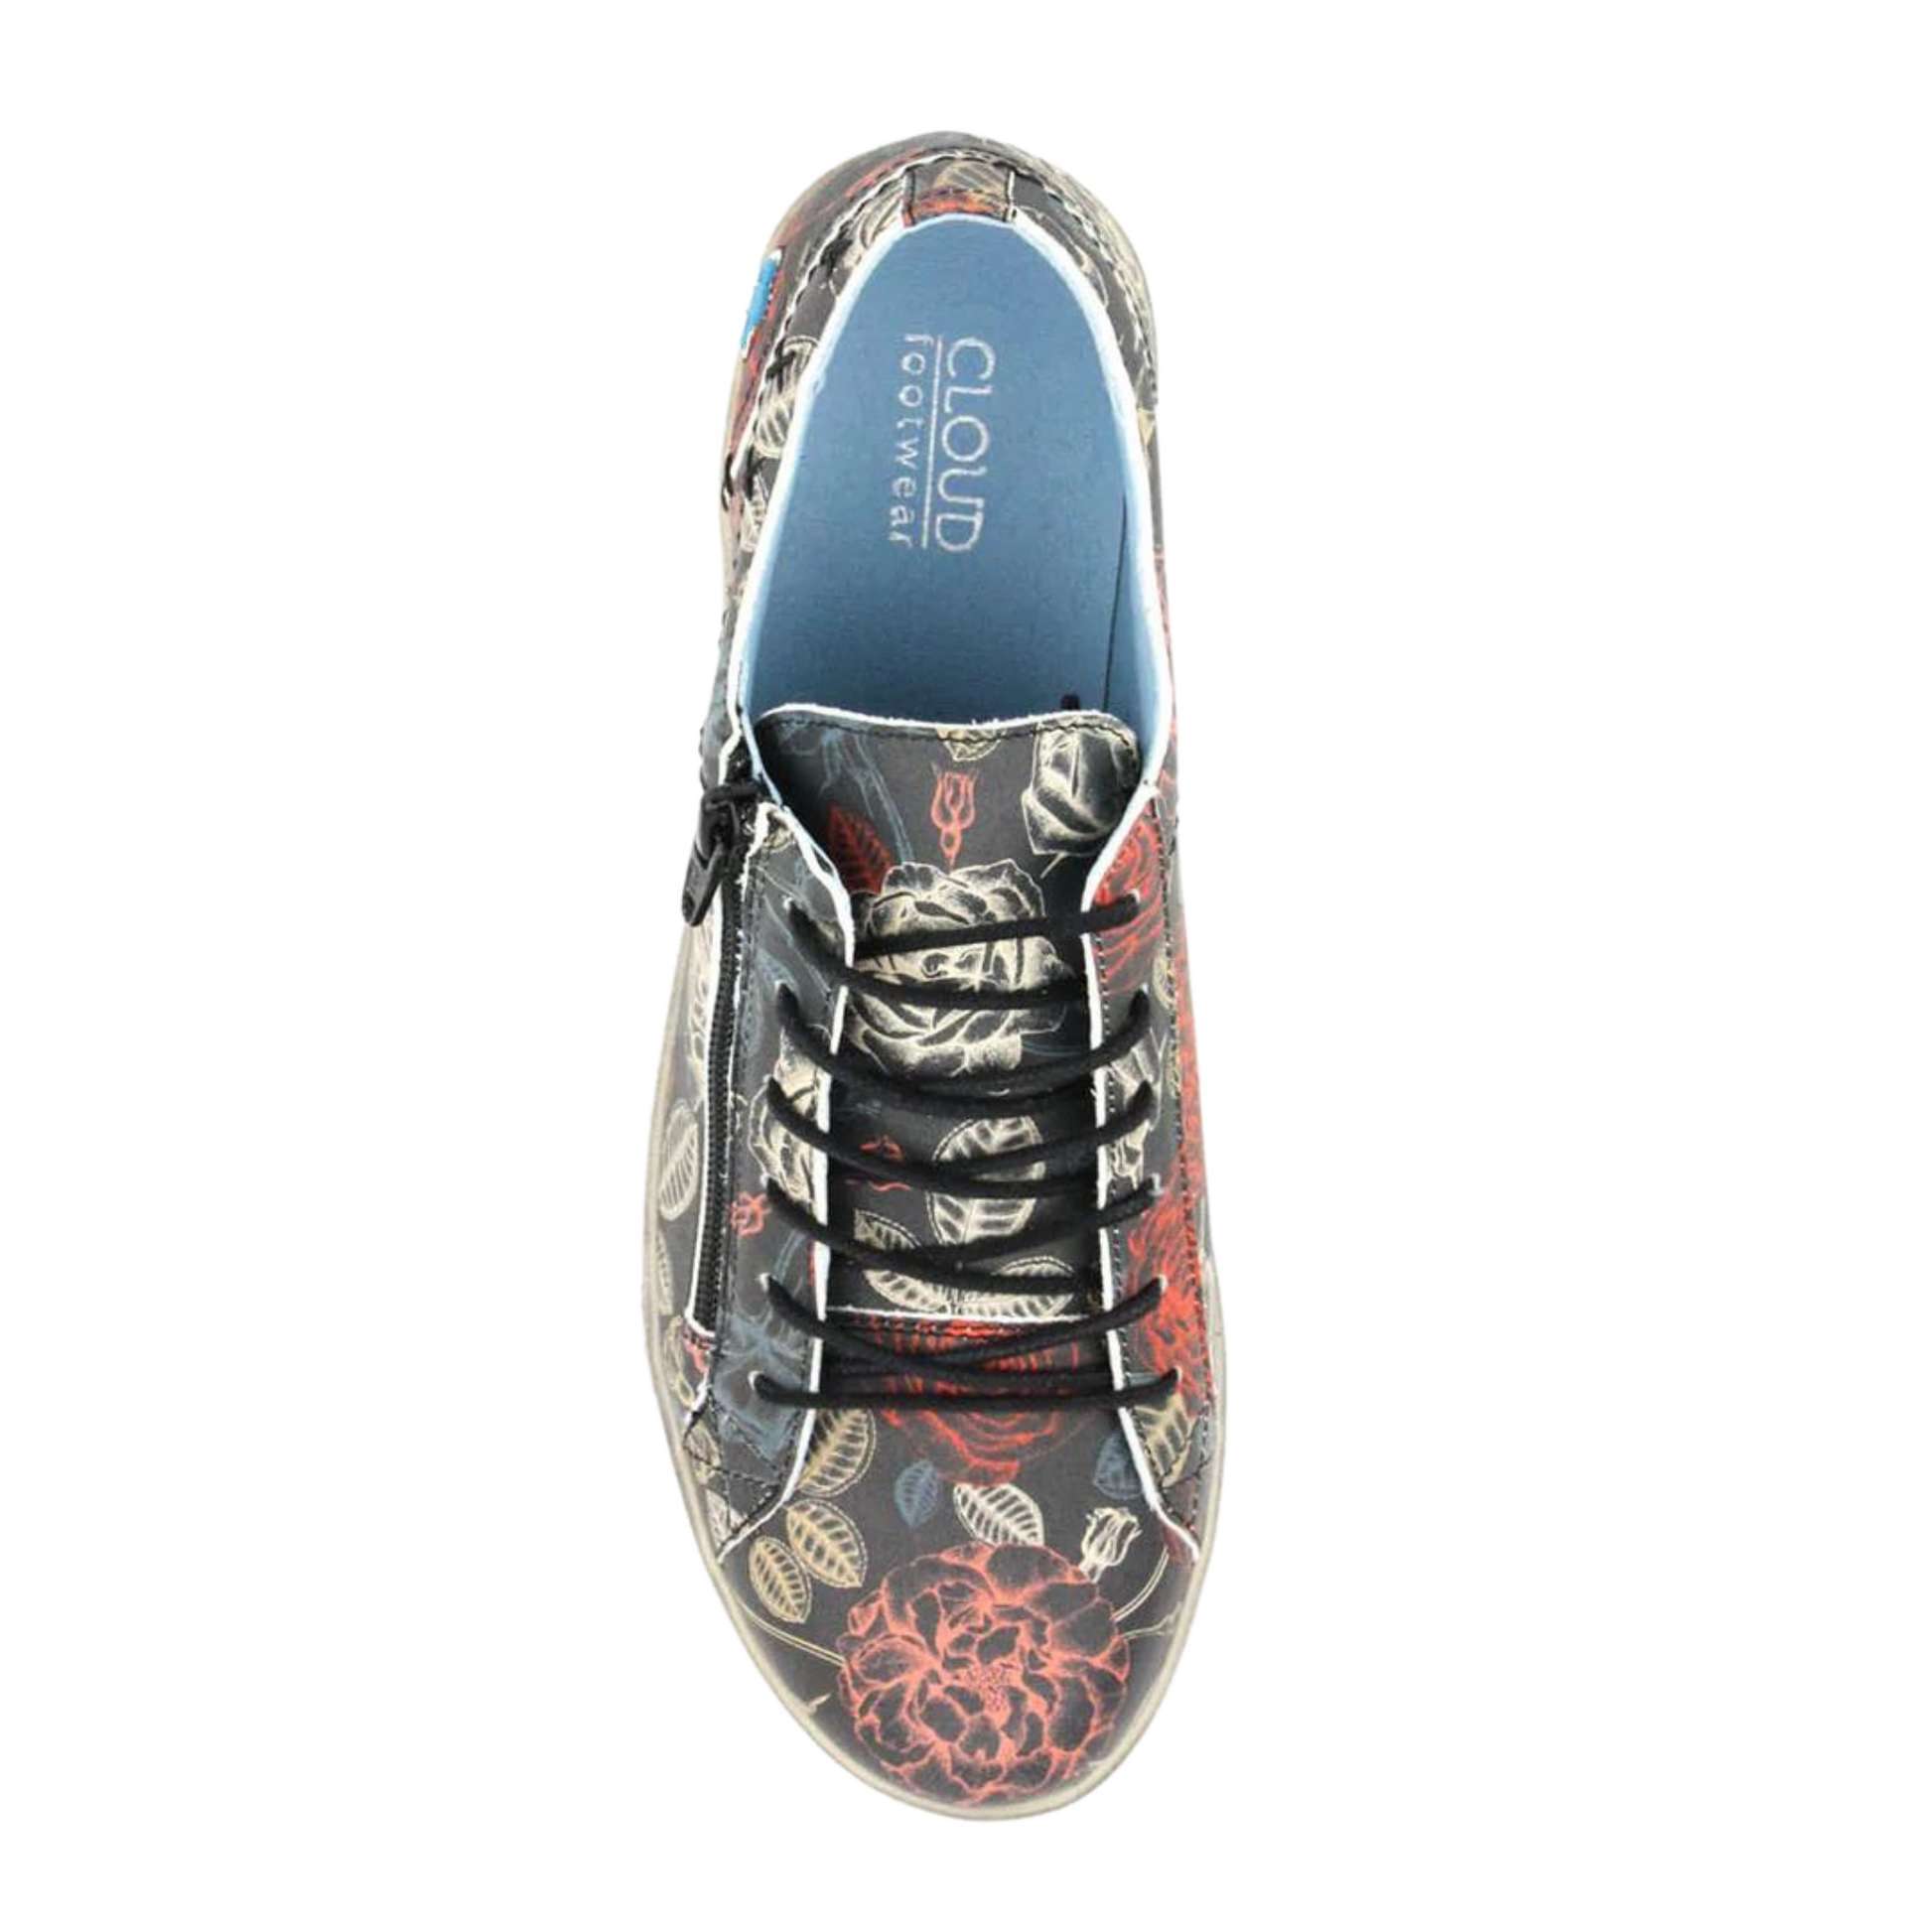 A top view of a colourful floral-patterned sneaker.